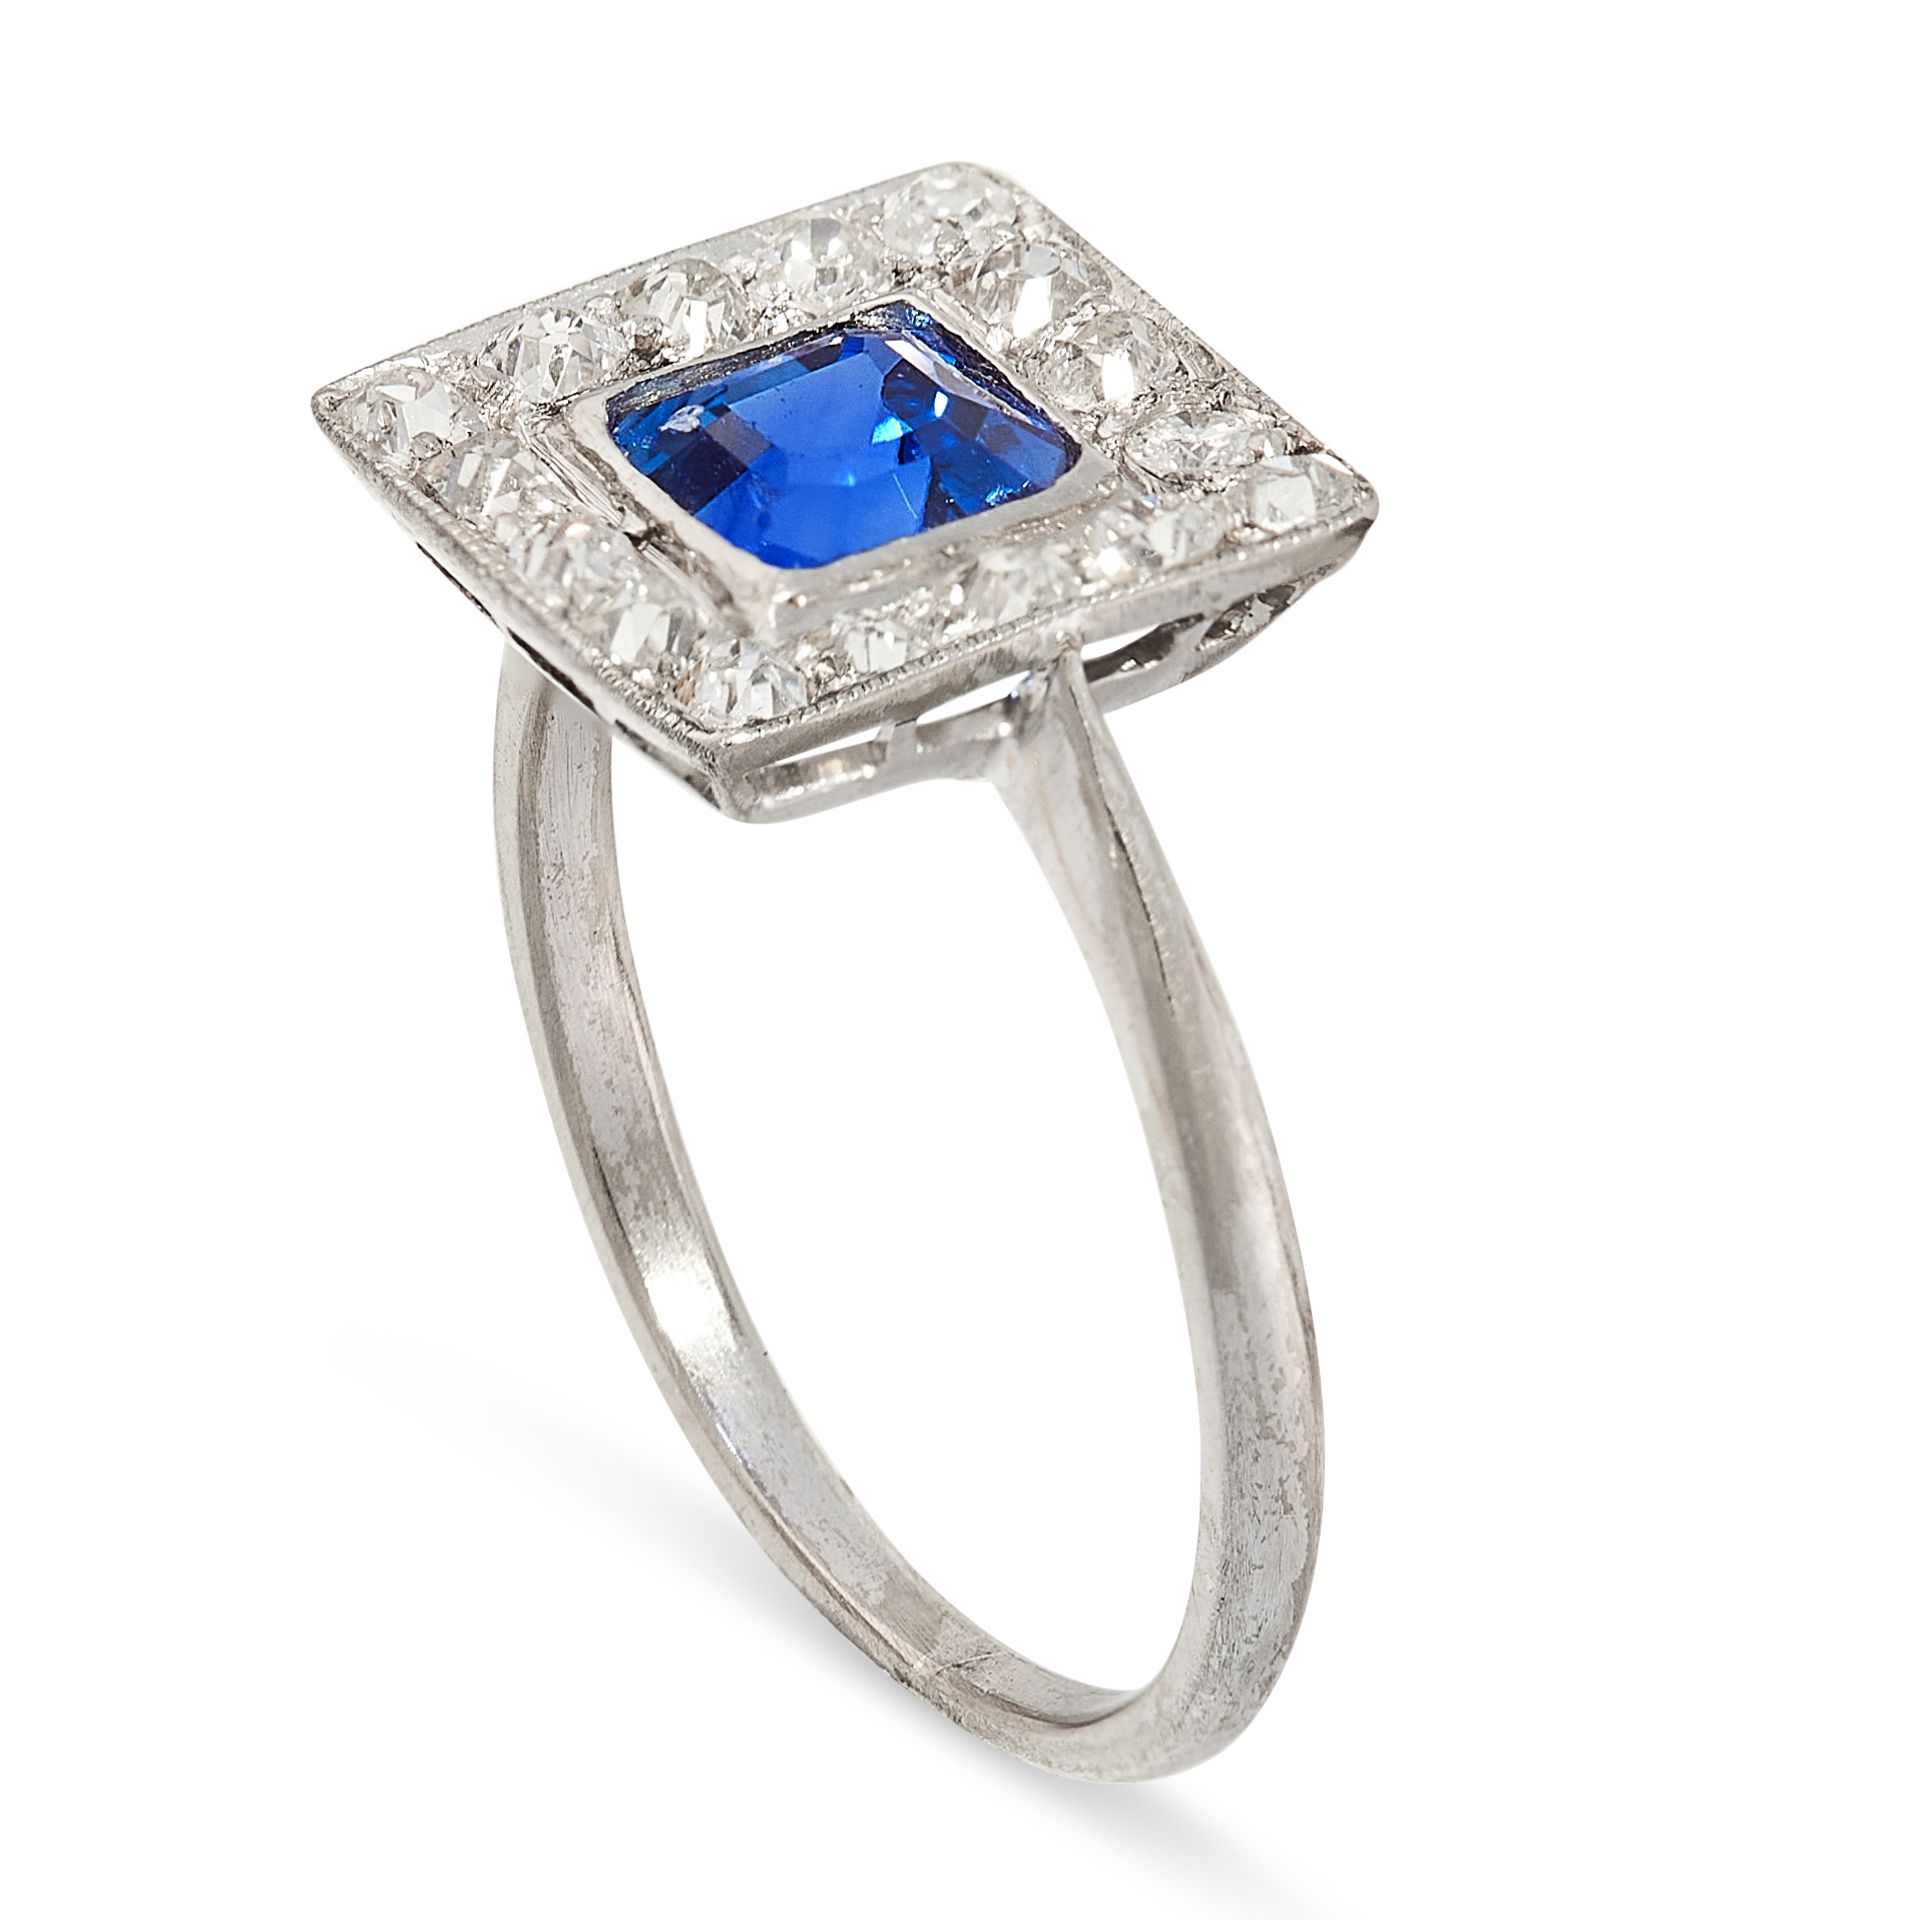 A SAPPHIRE AND DIAMOND RING the square face set with an emerald cut sapphire of 1.11 carats in a - Image 2 of 2